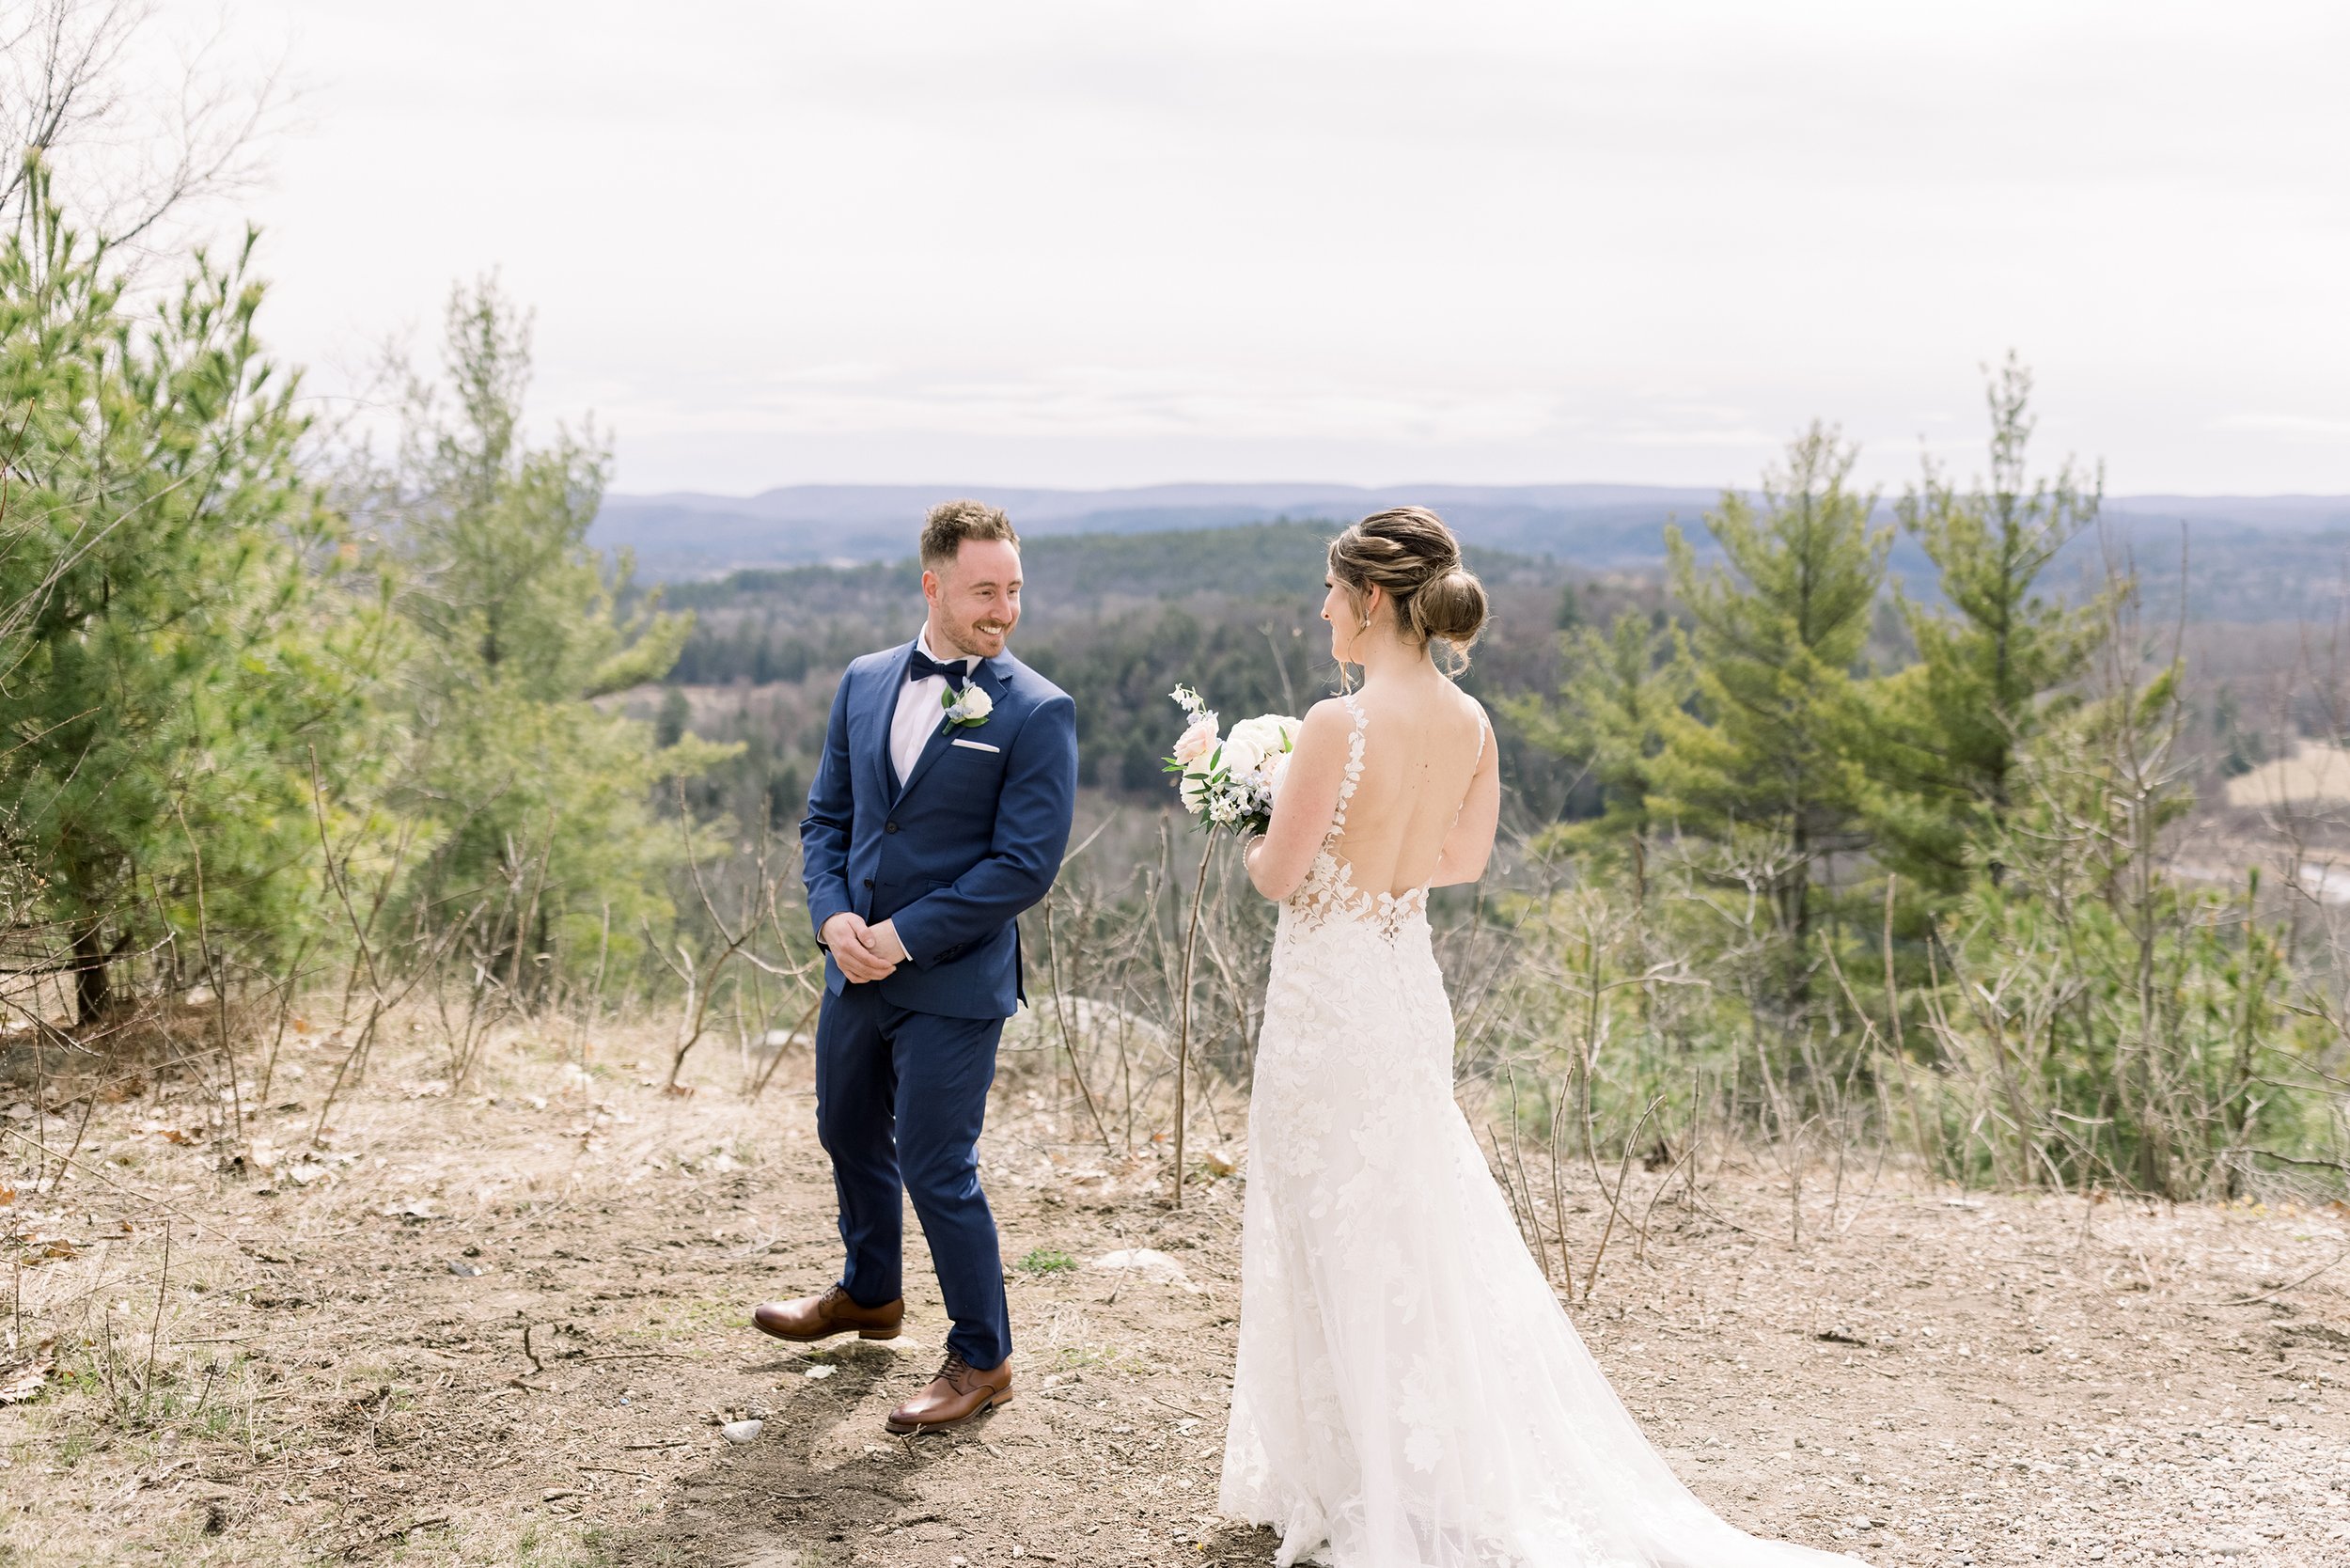  A bride surprises the groom during the first look at Le Belvedere by Chelsea Mason Photography. first look with groom #ChelseaMasonPhotography #ChelseaMasonWeddings #WakefieldWeddings #LeBelvedere #Wakefieldweddingphotographers 